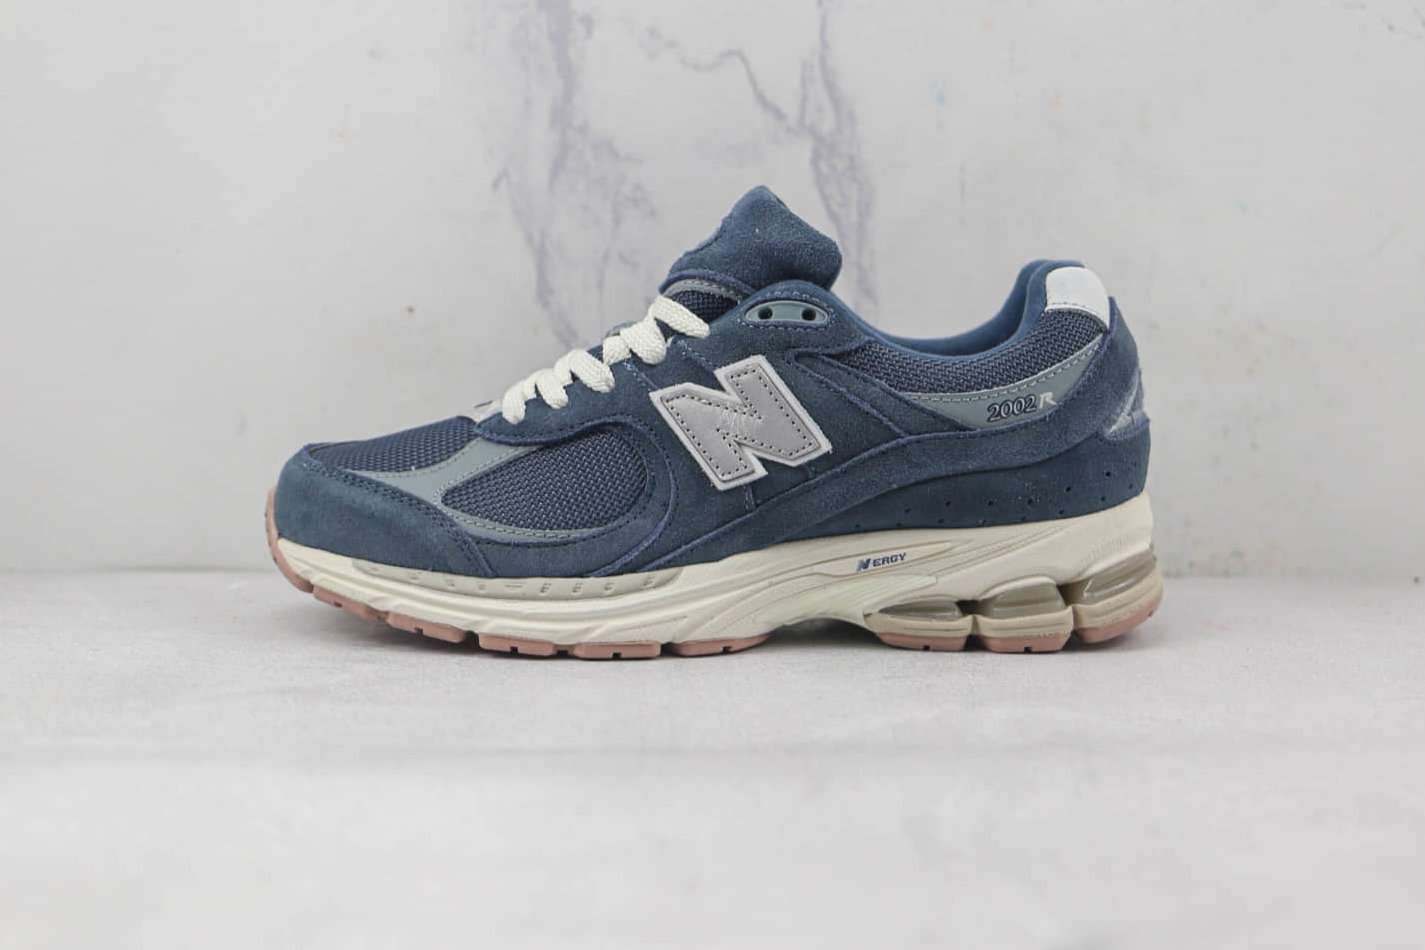 New Balance 2002R 'Deep Ocean Slate Grey' M2002RHC - Premium Sneakers for Ultimate Style and Comfort